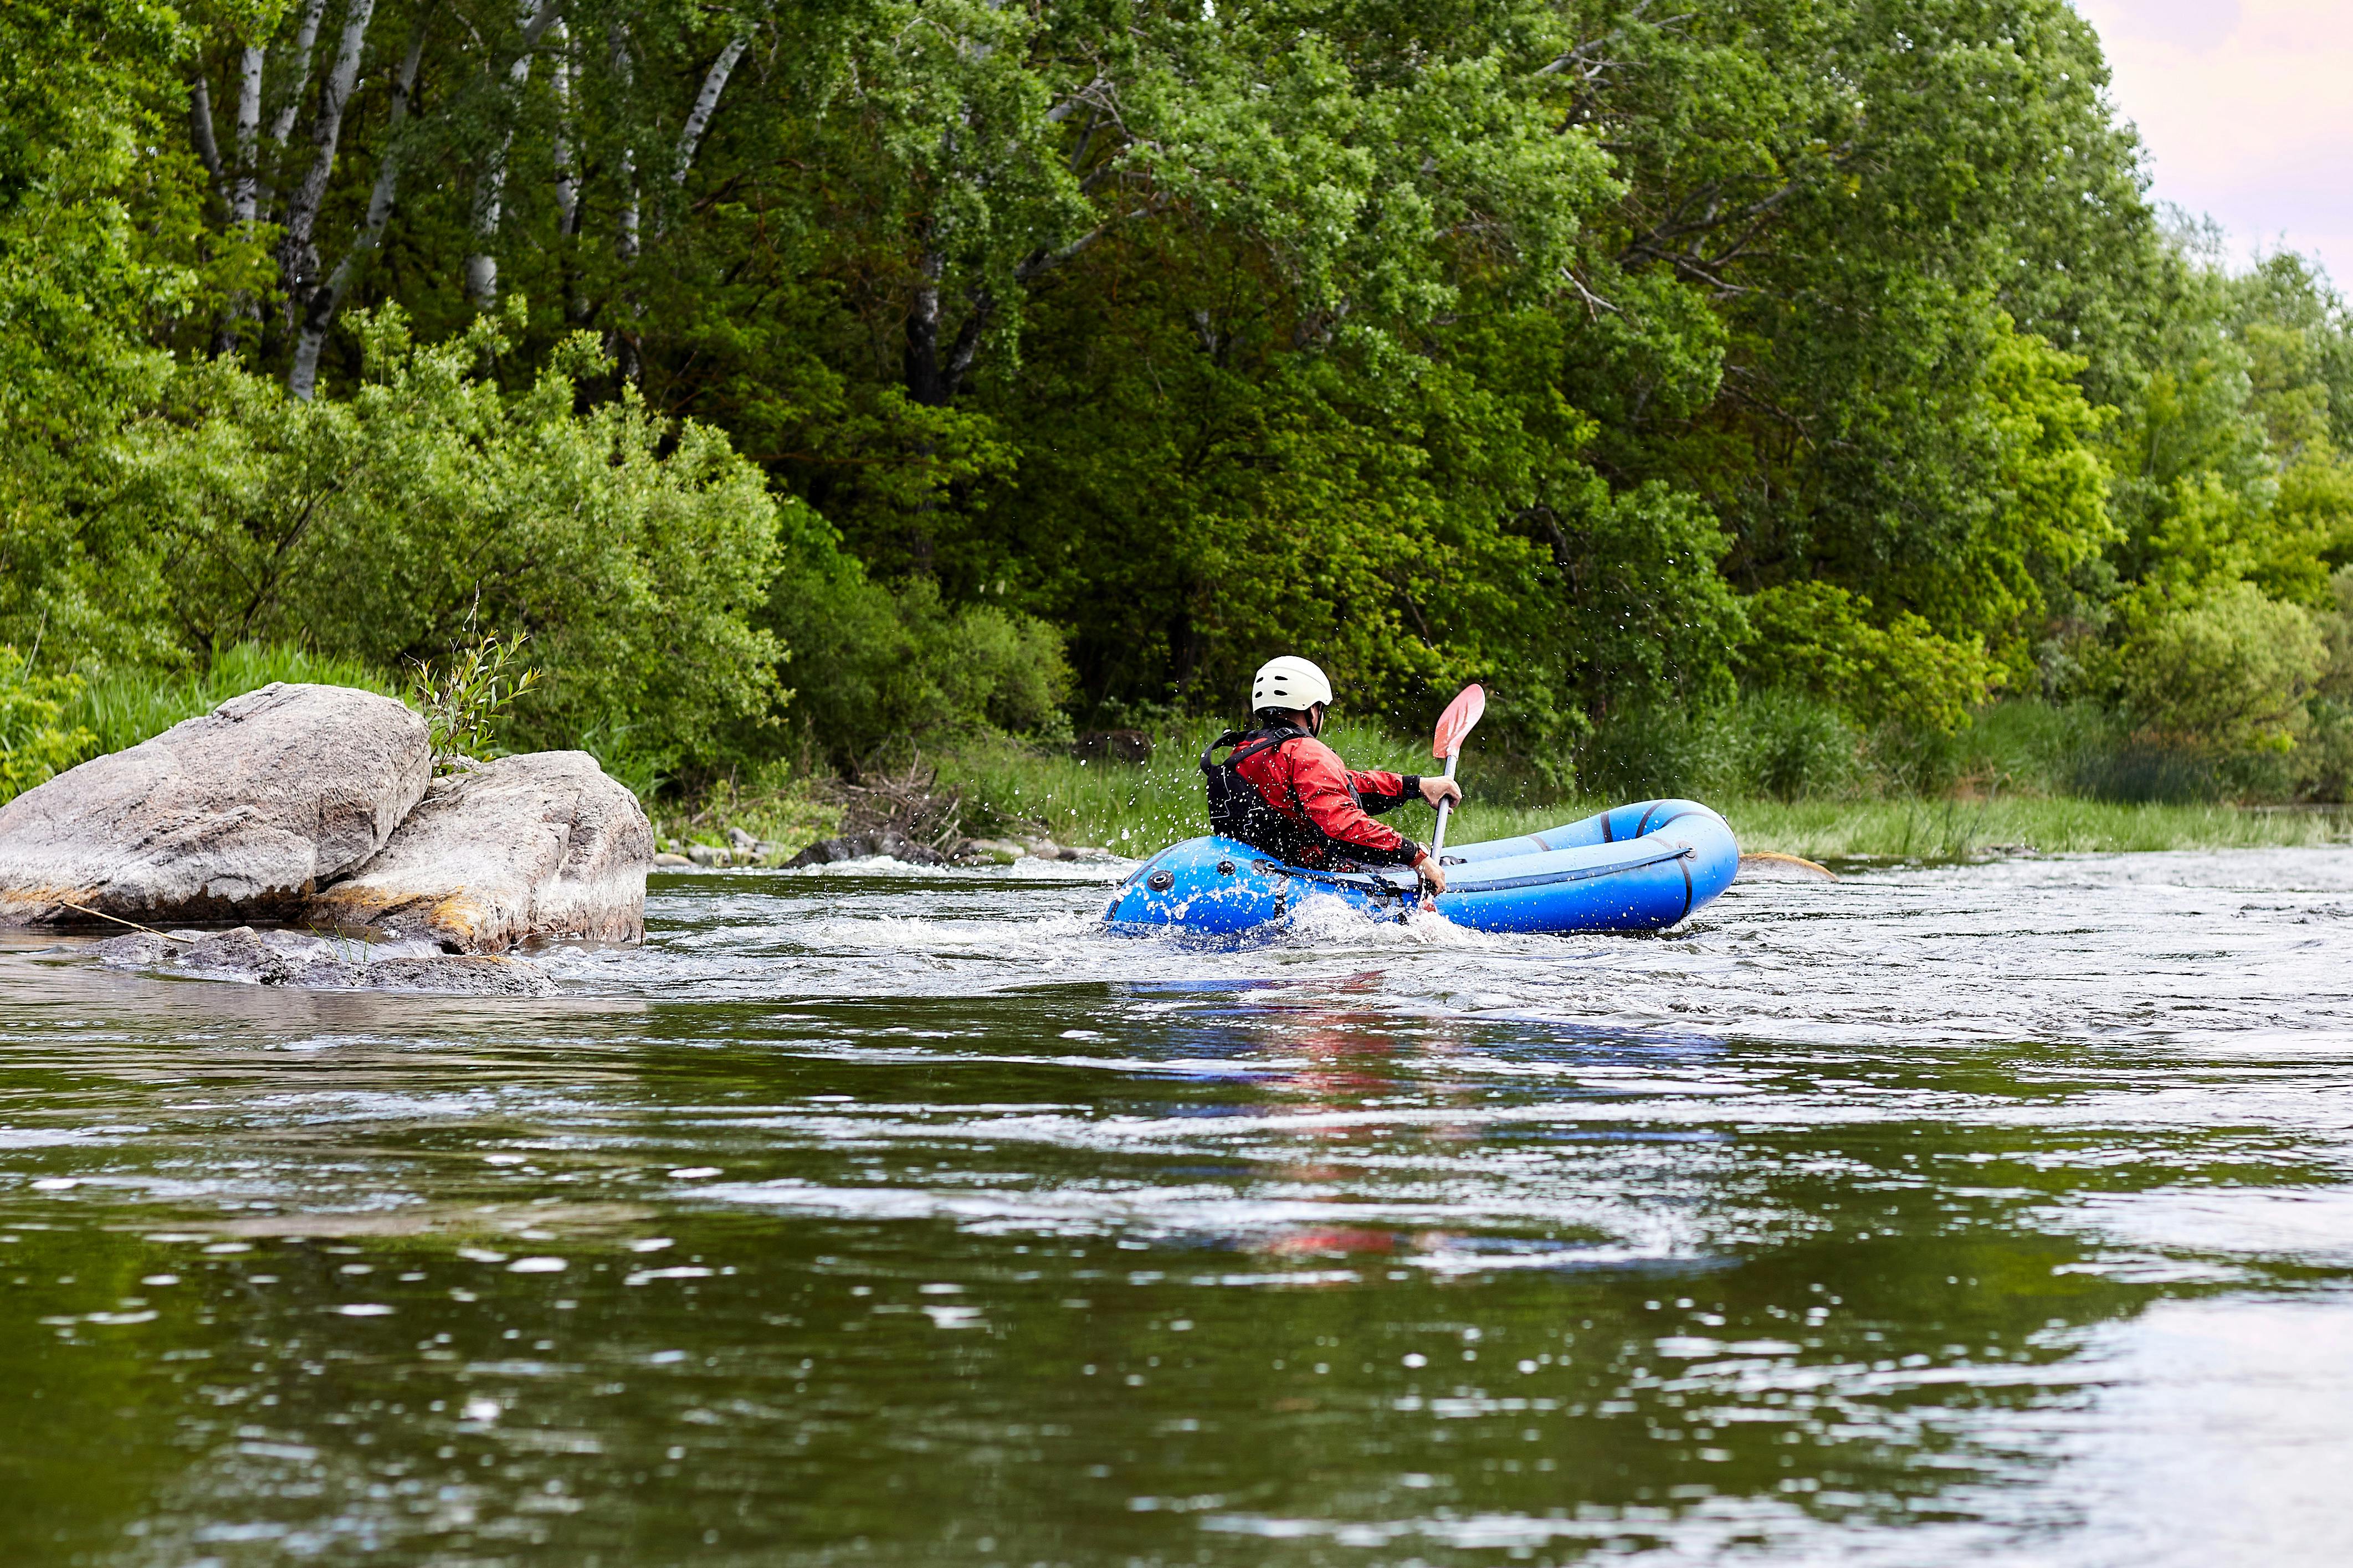 Man paddling an inflatable blue packraft on a river in early spring spring